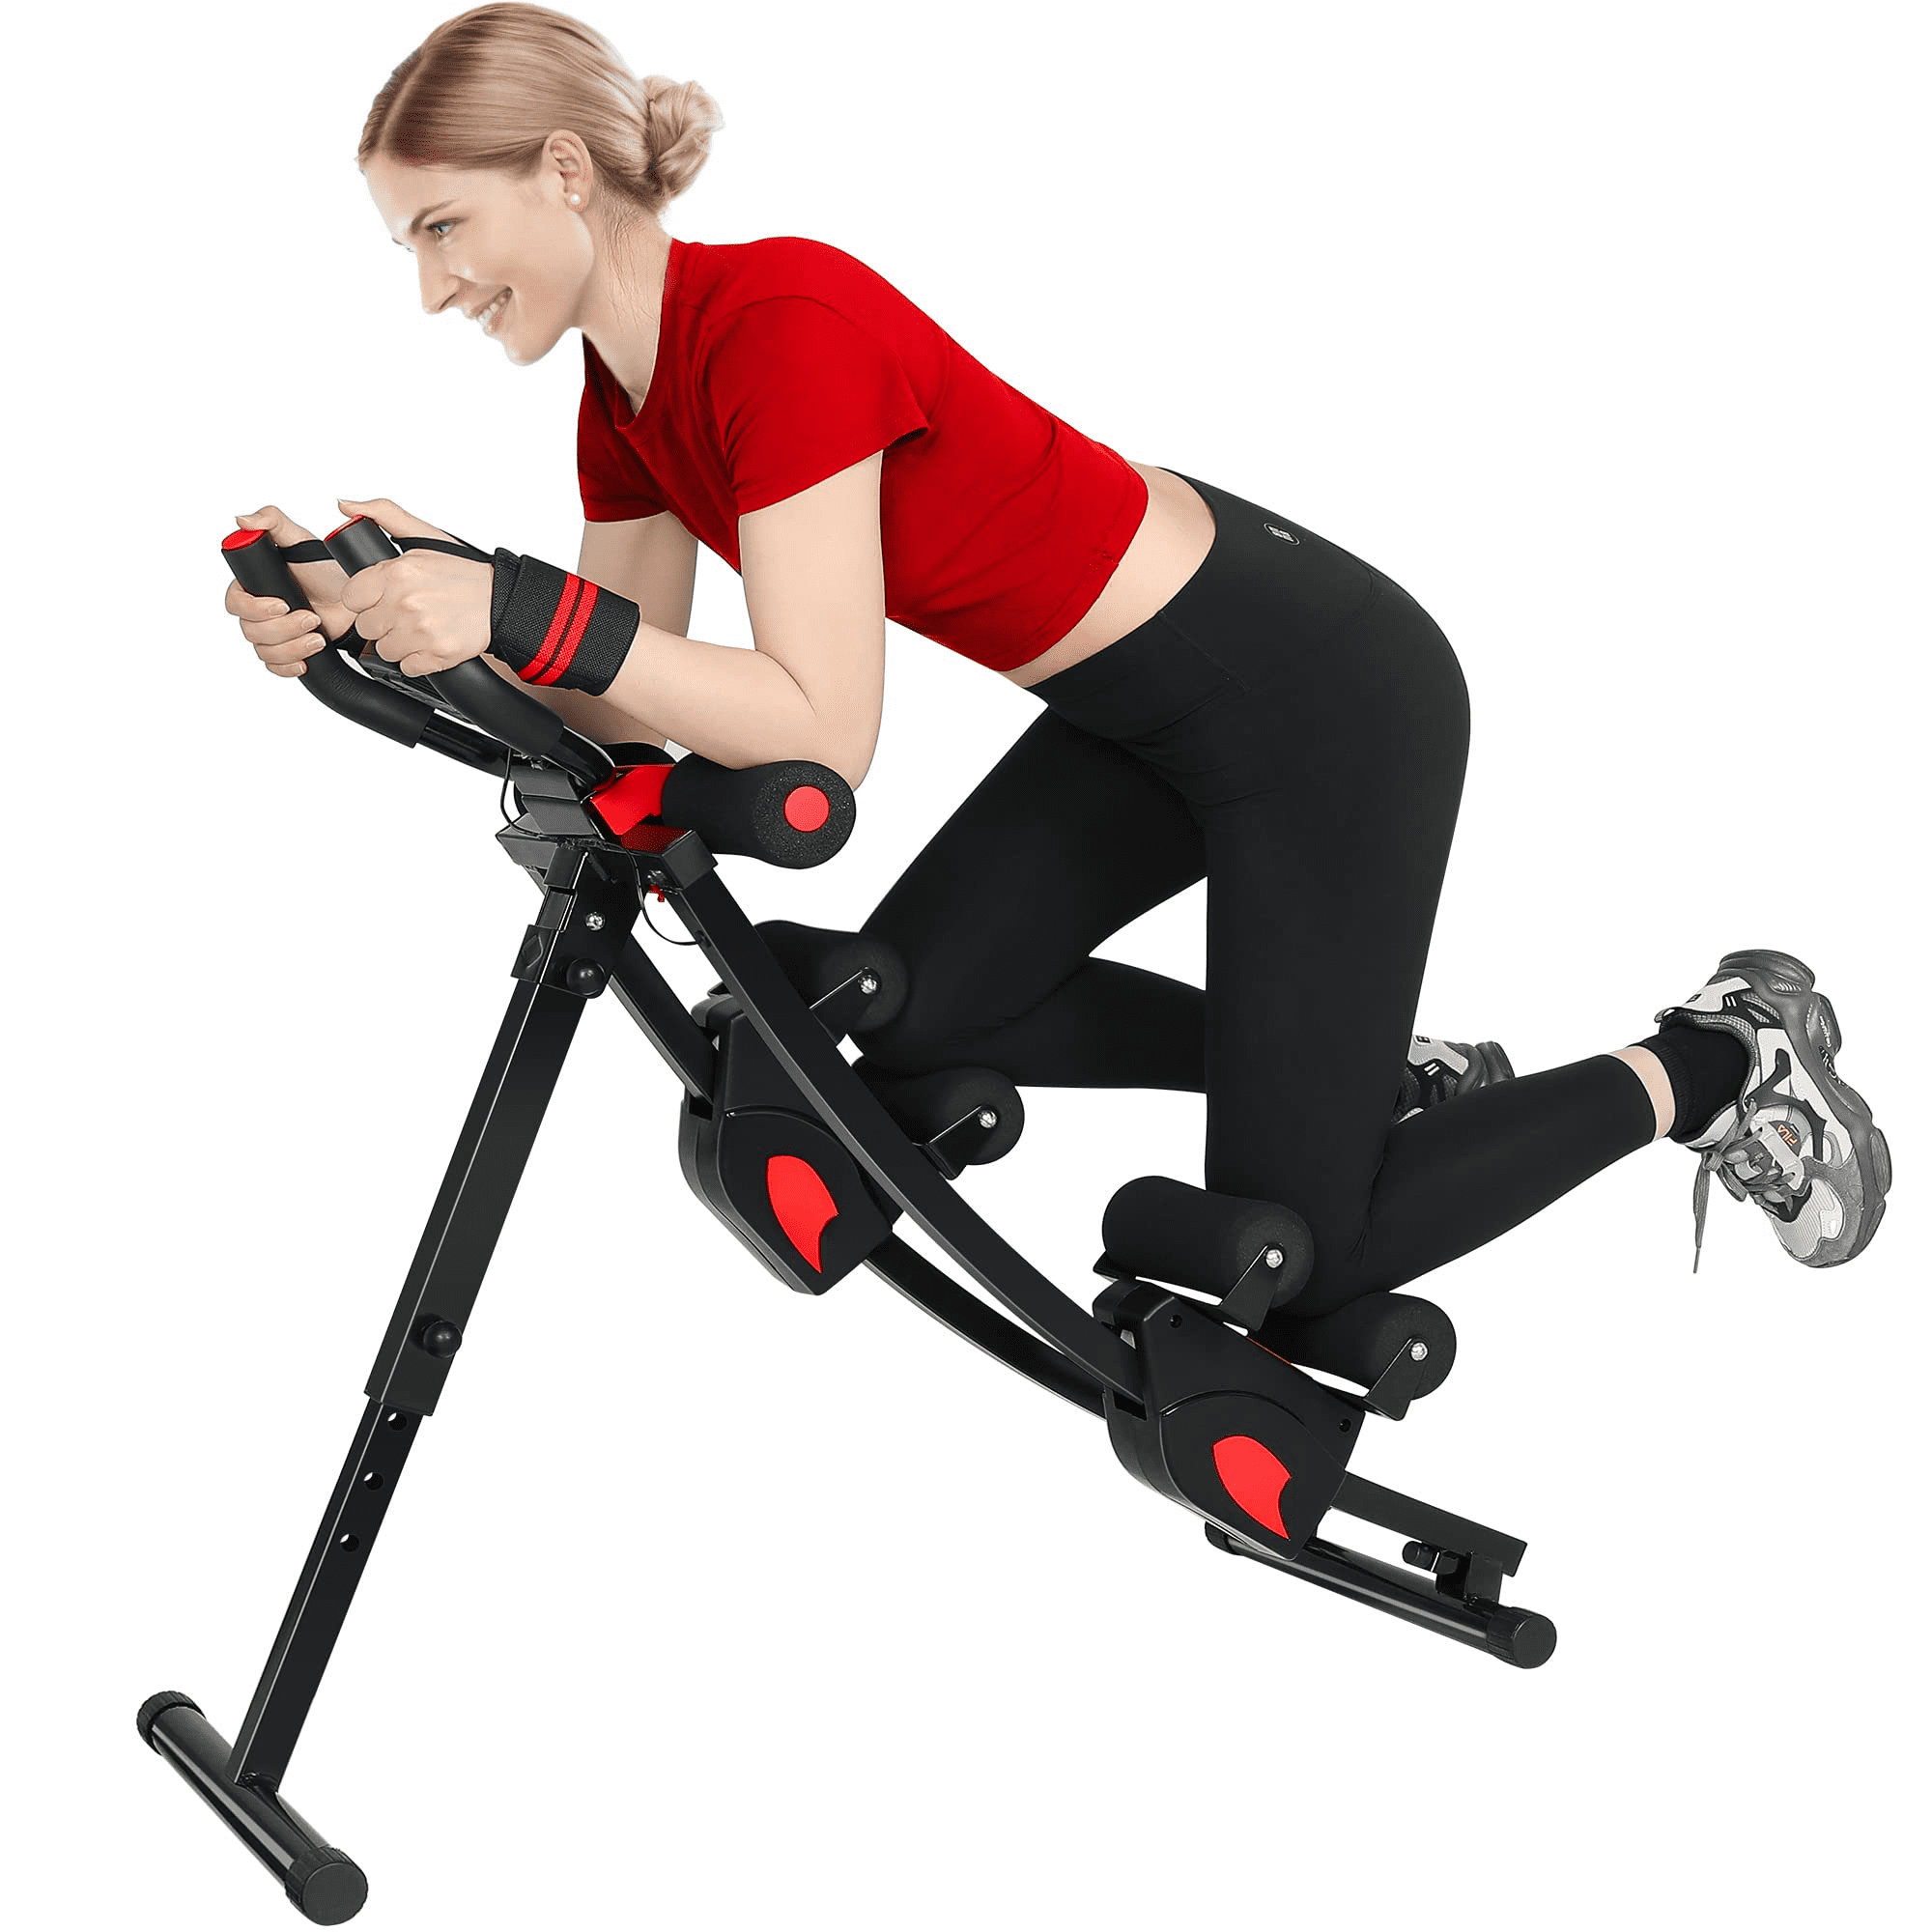 Details about   Arm Exercise Tool Cylinder Adjustable Power Twister Fitness Arm trainer machine 